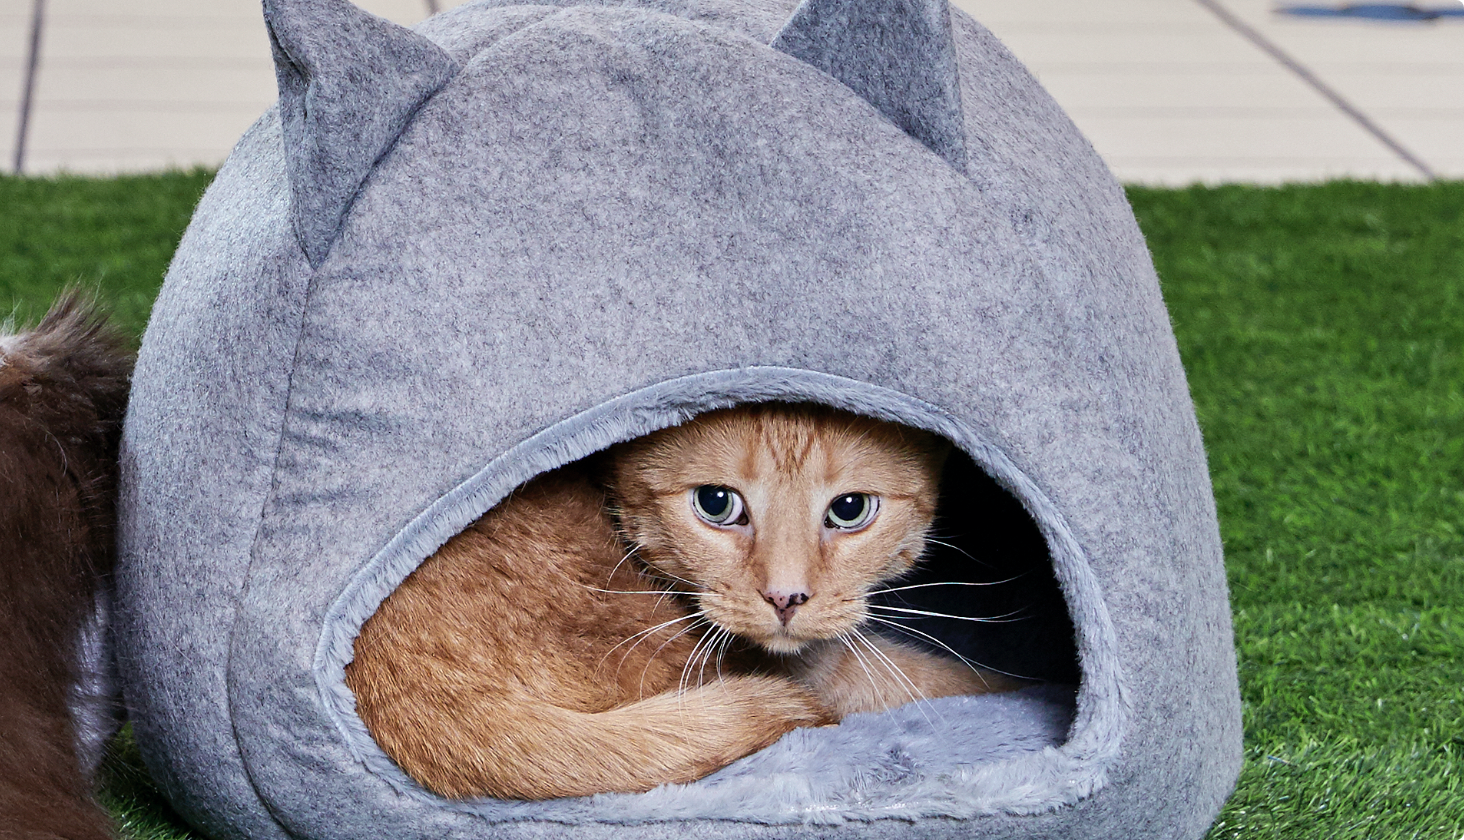 Cat sitting in a hooded igloo cat bed.